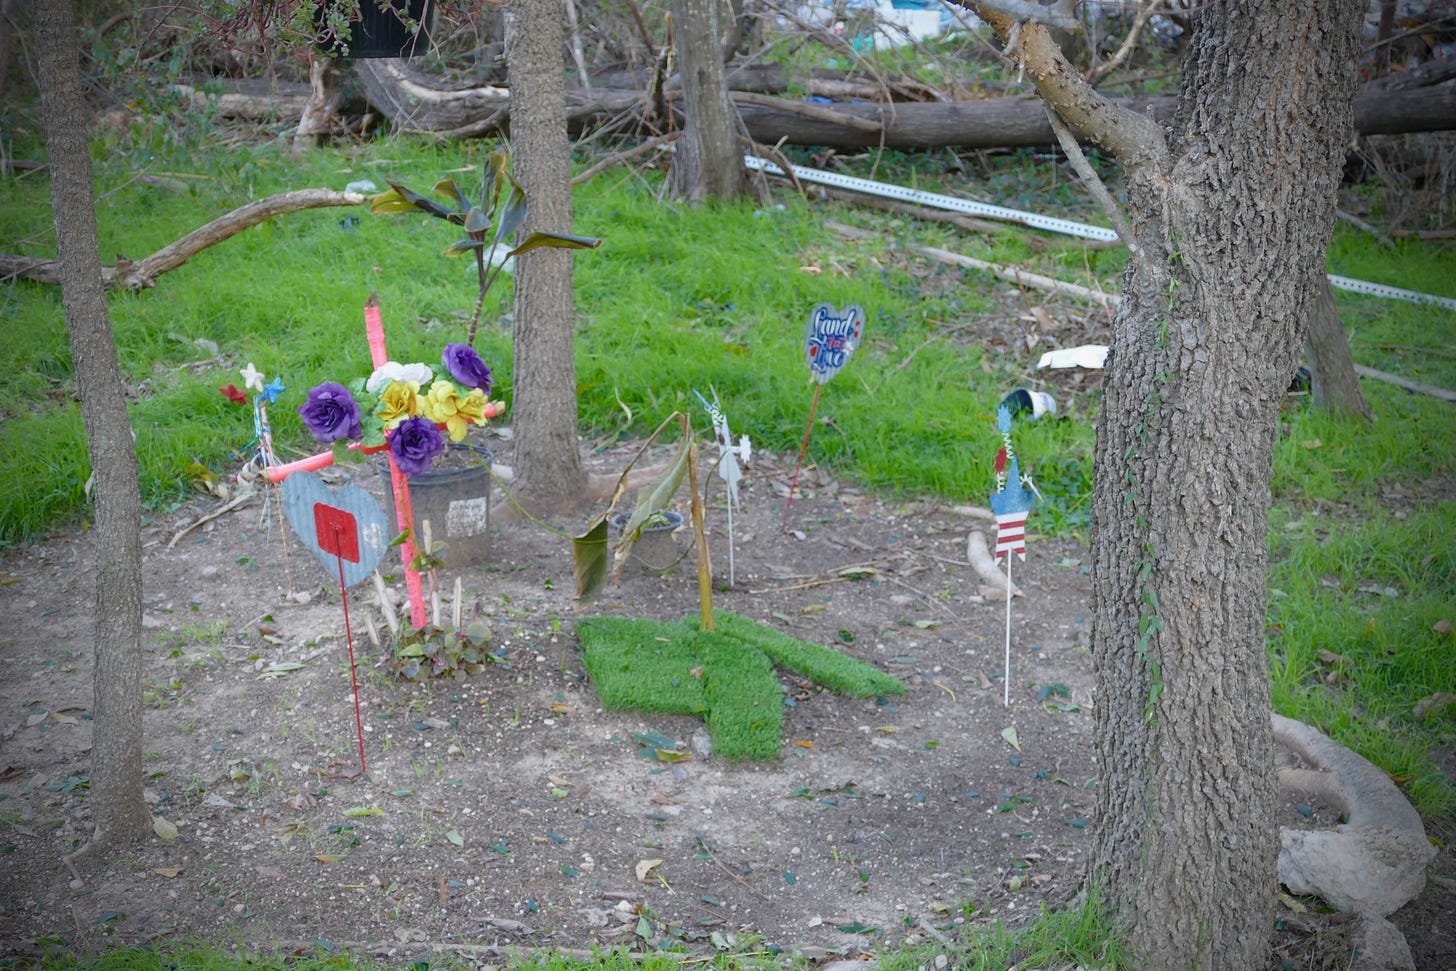 Picture of a shrine with pink cross and other decorations in the heart of a homeless camp, as described in more detail in the paragraph that follows